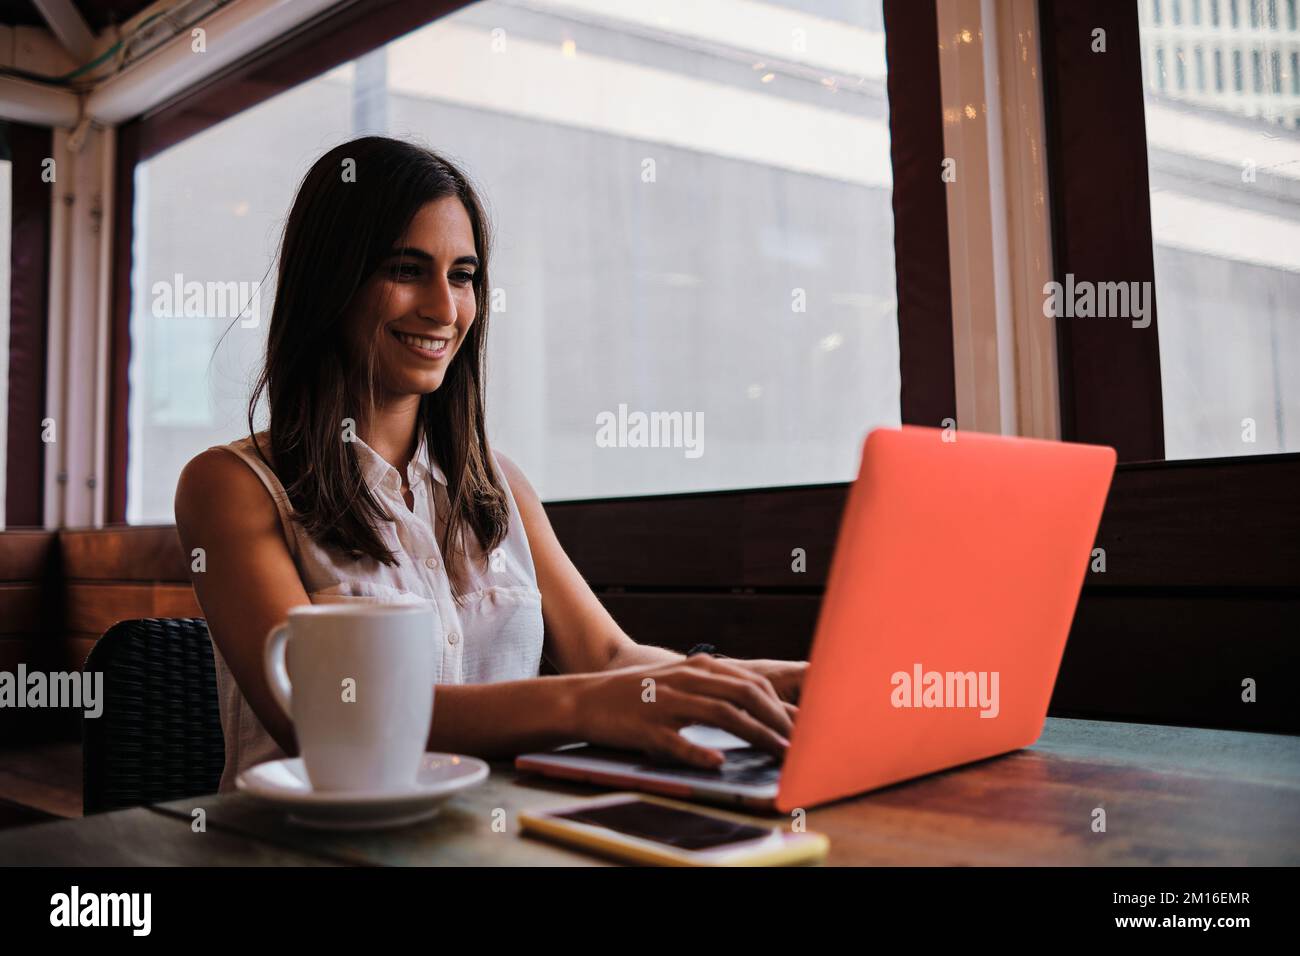 Woman working with a laptop sitting in a cafeteria Stock Photo